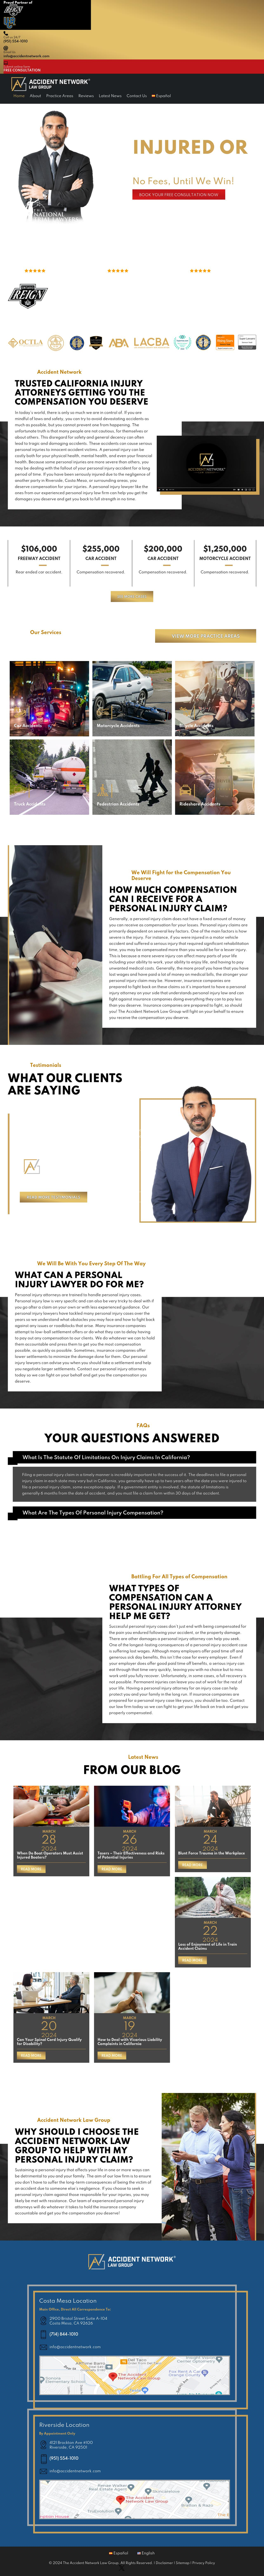 The Accident Network Law Group - Riverside CA Lawyers